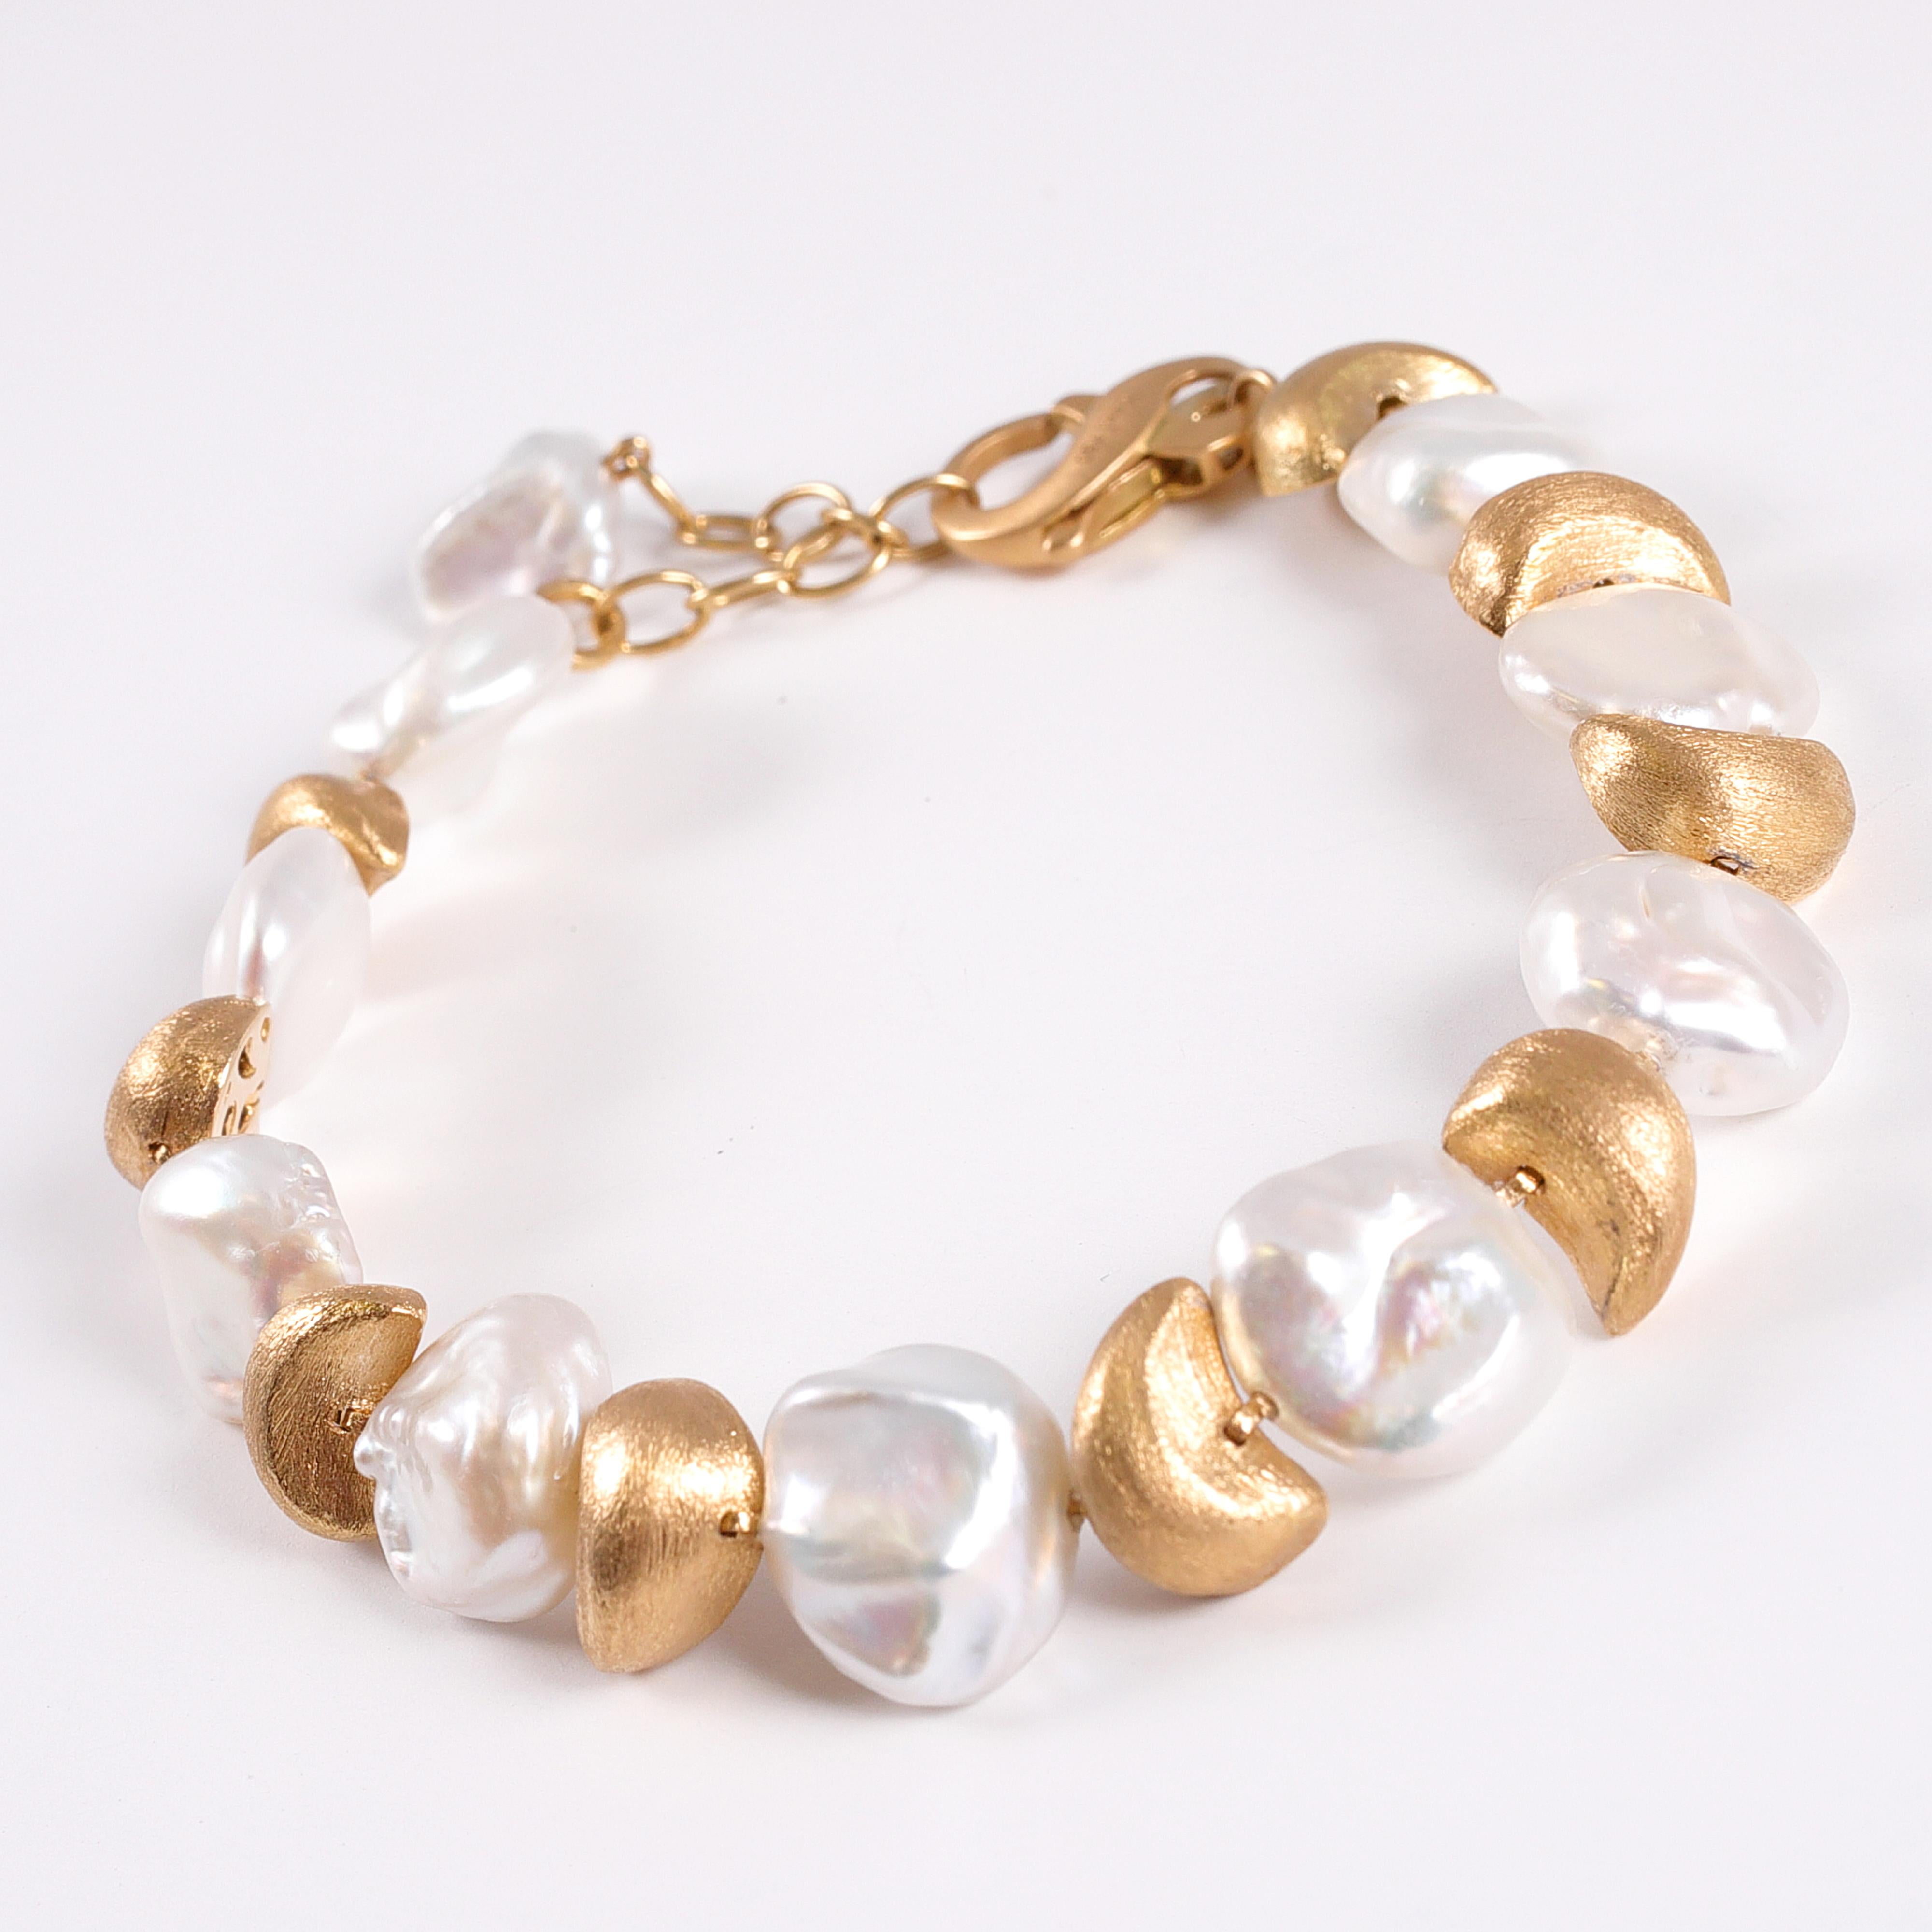 Bracelet featuring baroque pearls with 18 Karat Gold crescents by Yvel.  The pearls average 10.5 to 11.5 millimeters.  The bracelet is adjustable in length from 7 to 8 inches and comes with the original box.